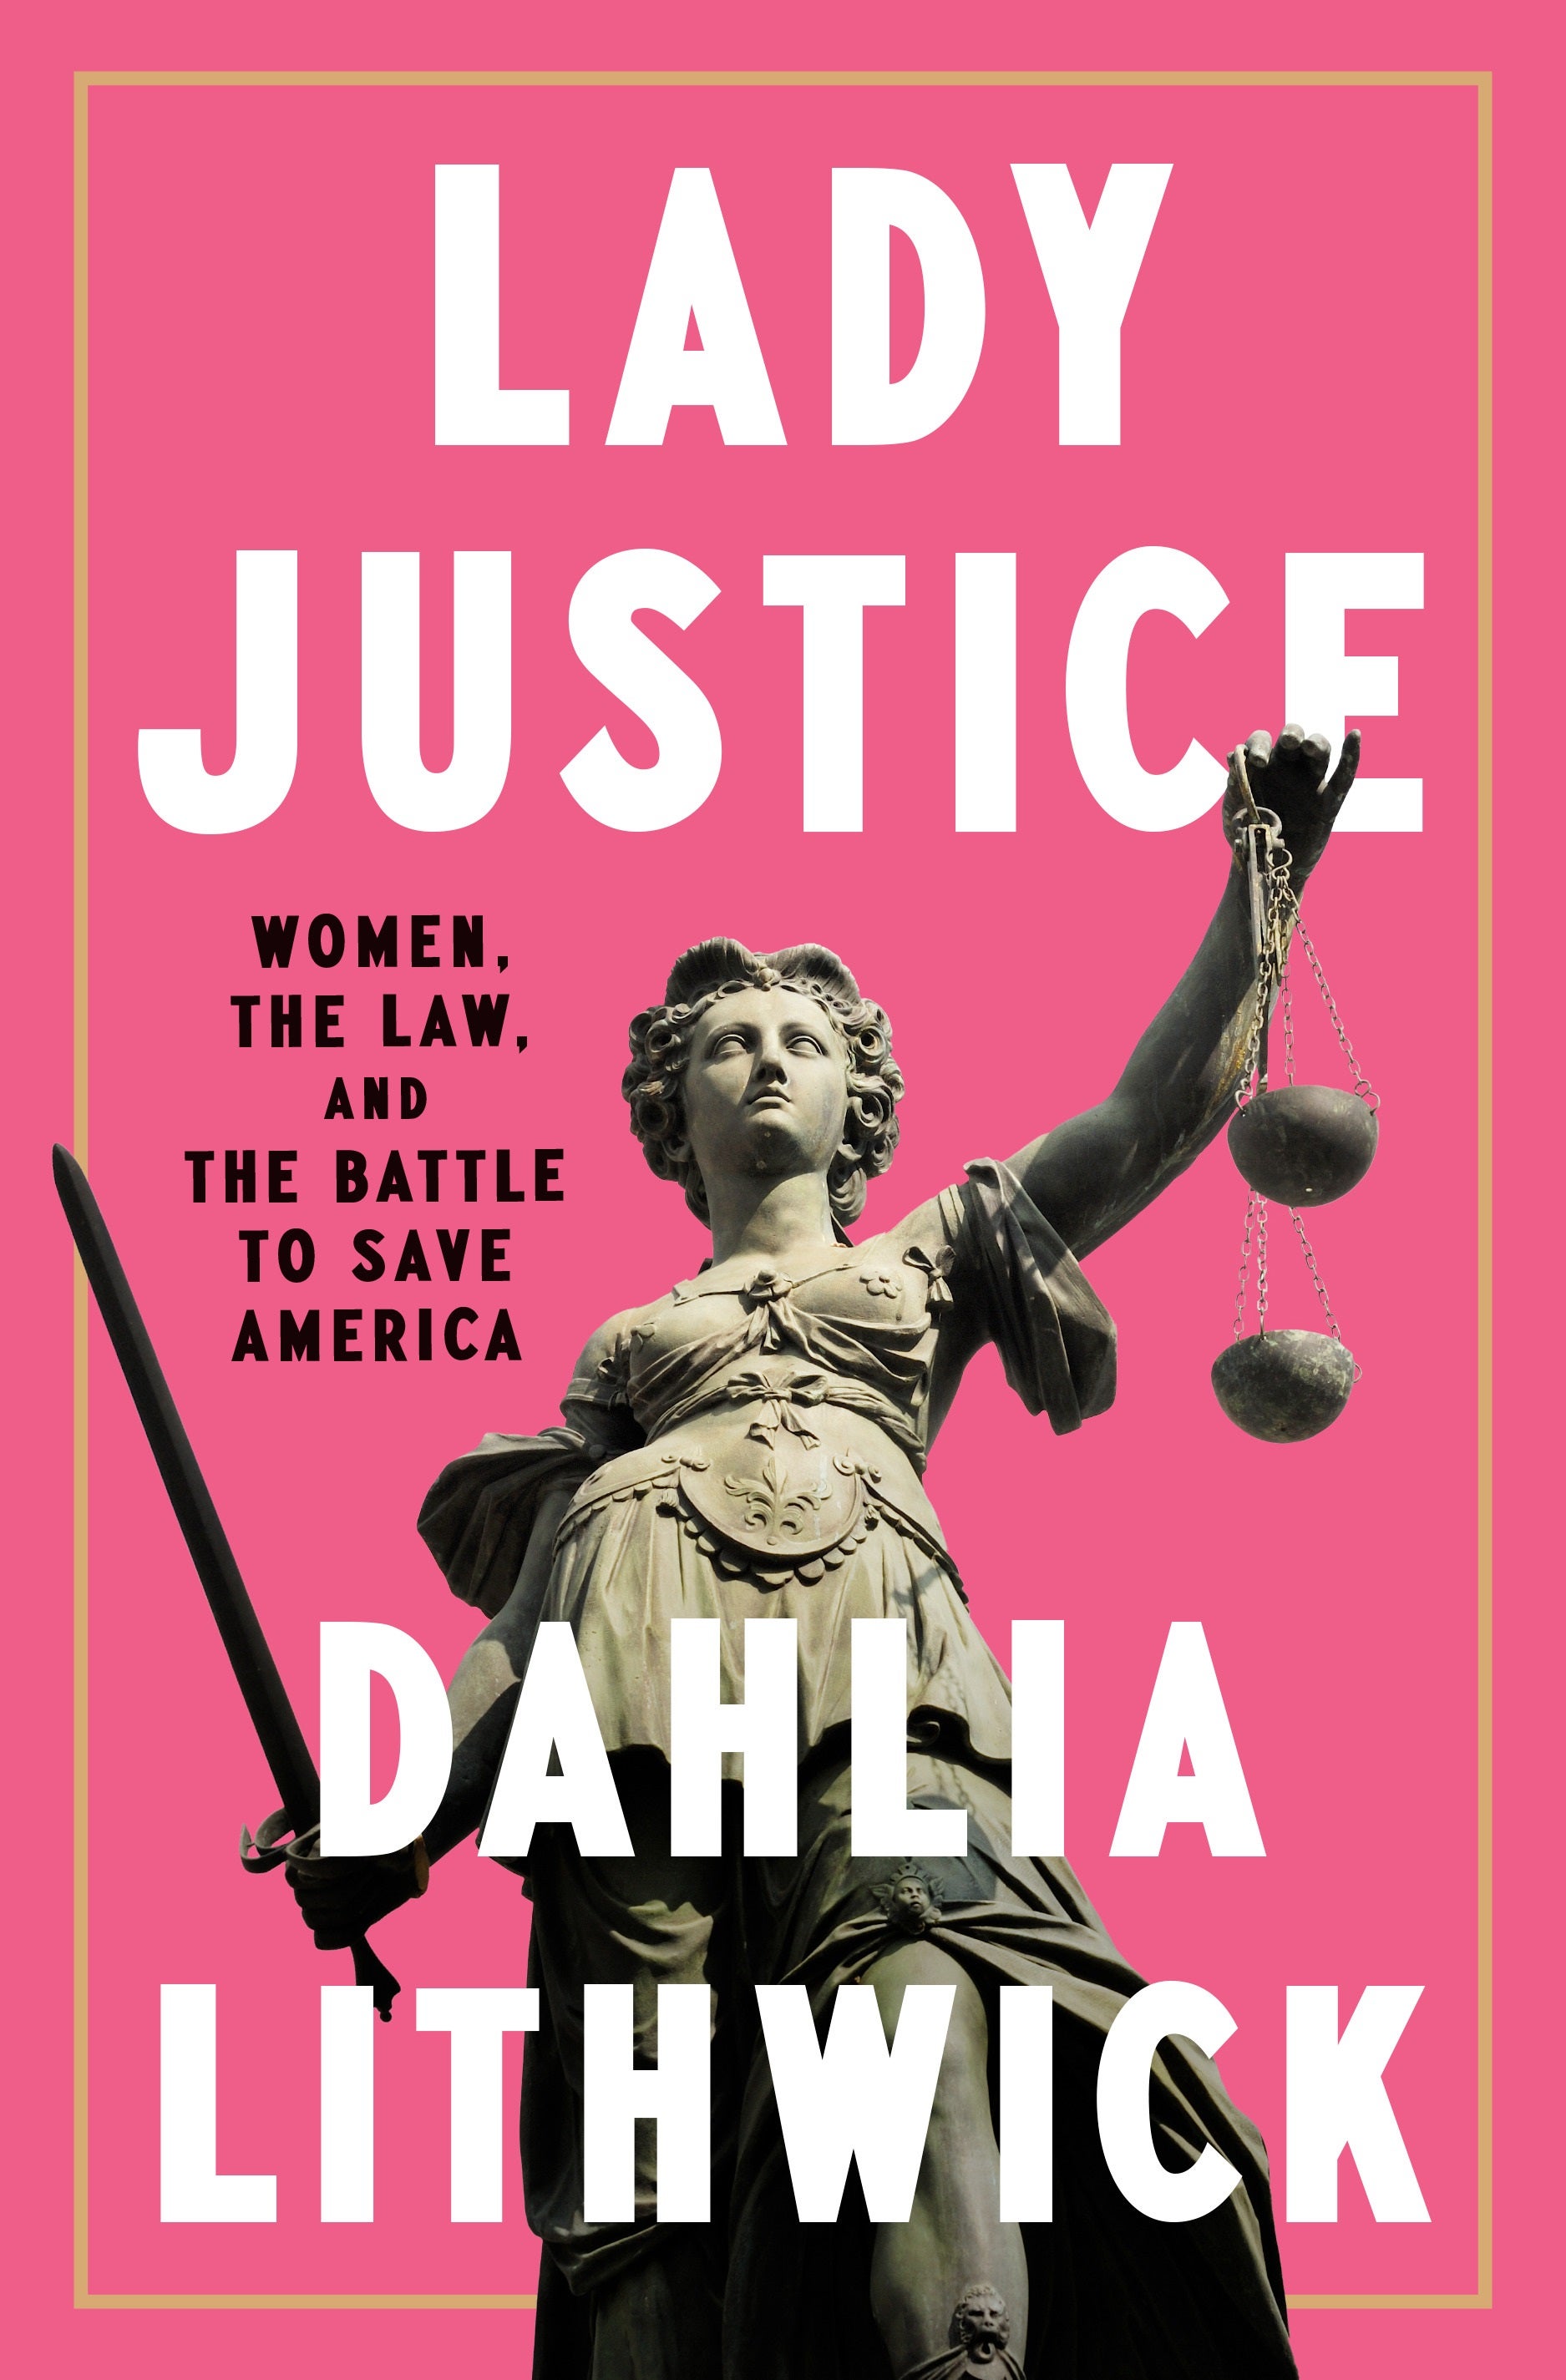 The cover of Lady Justice — a book with a pink cover, and a statue of lady justice.